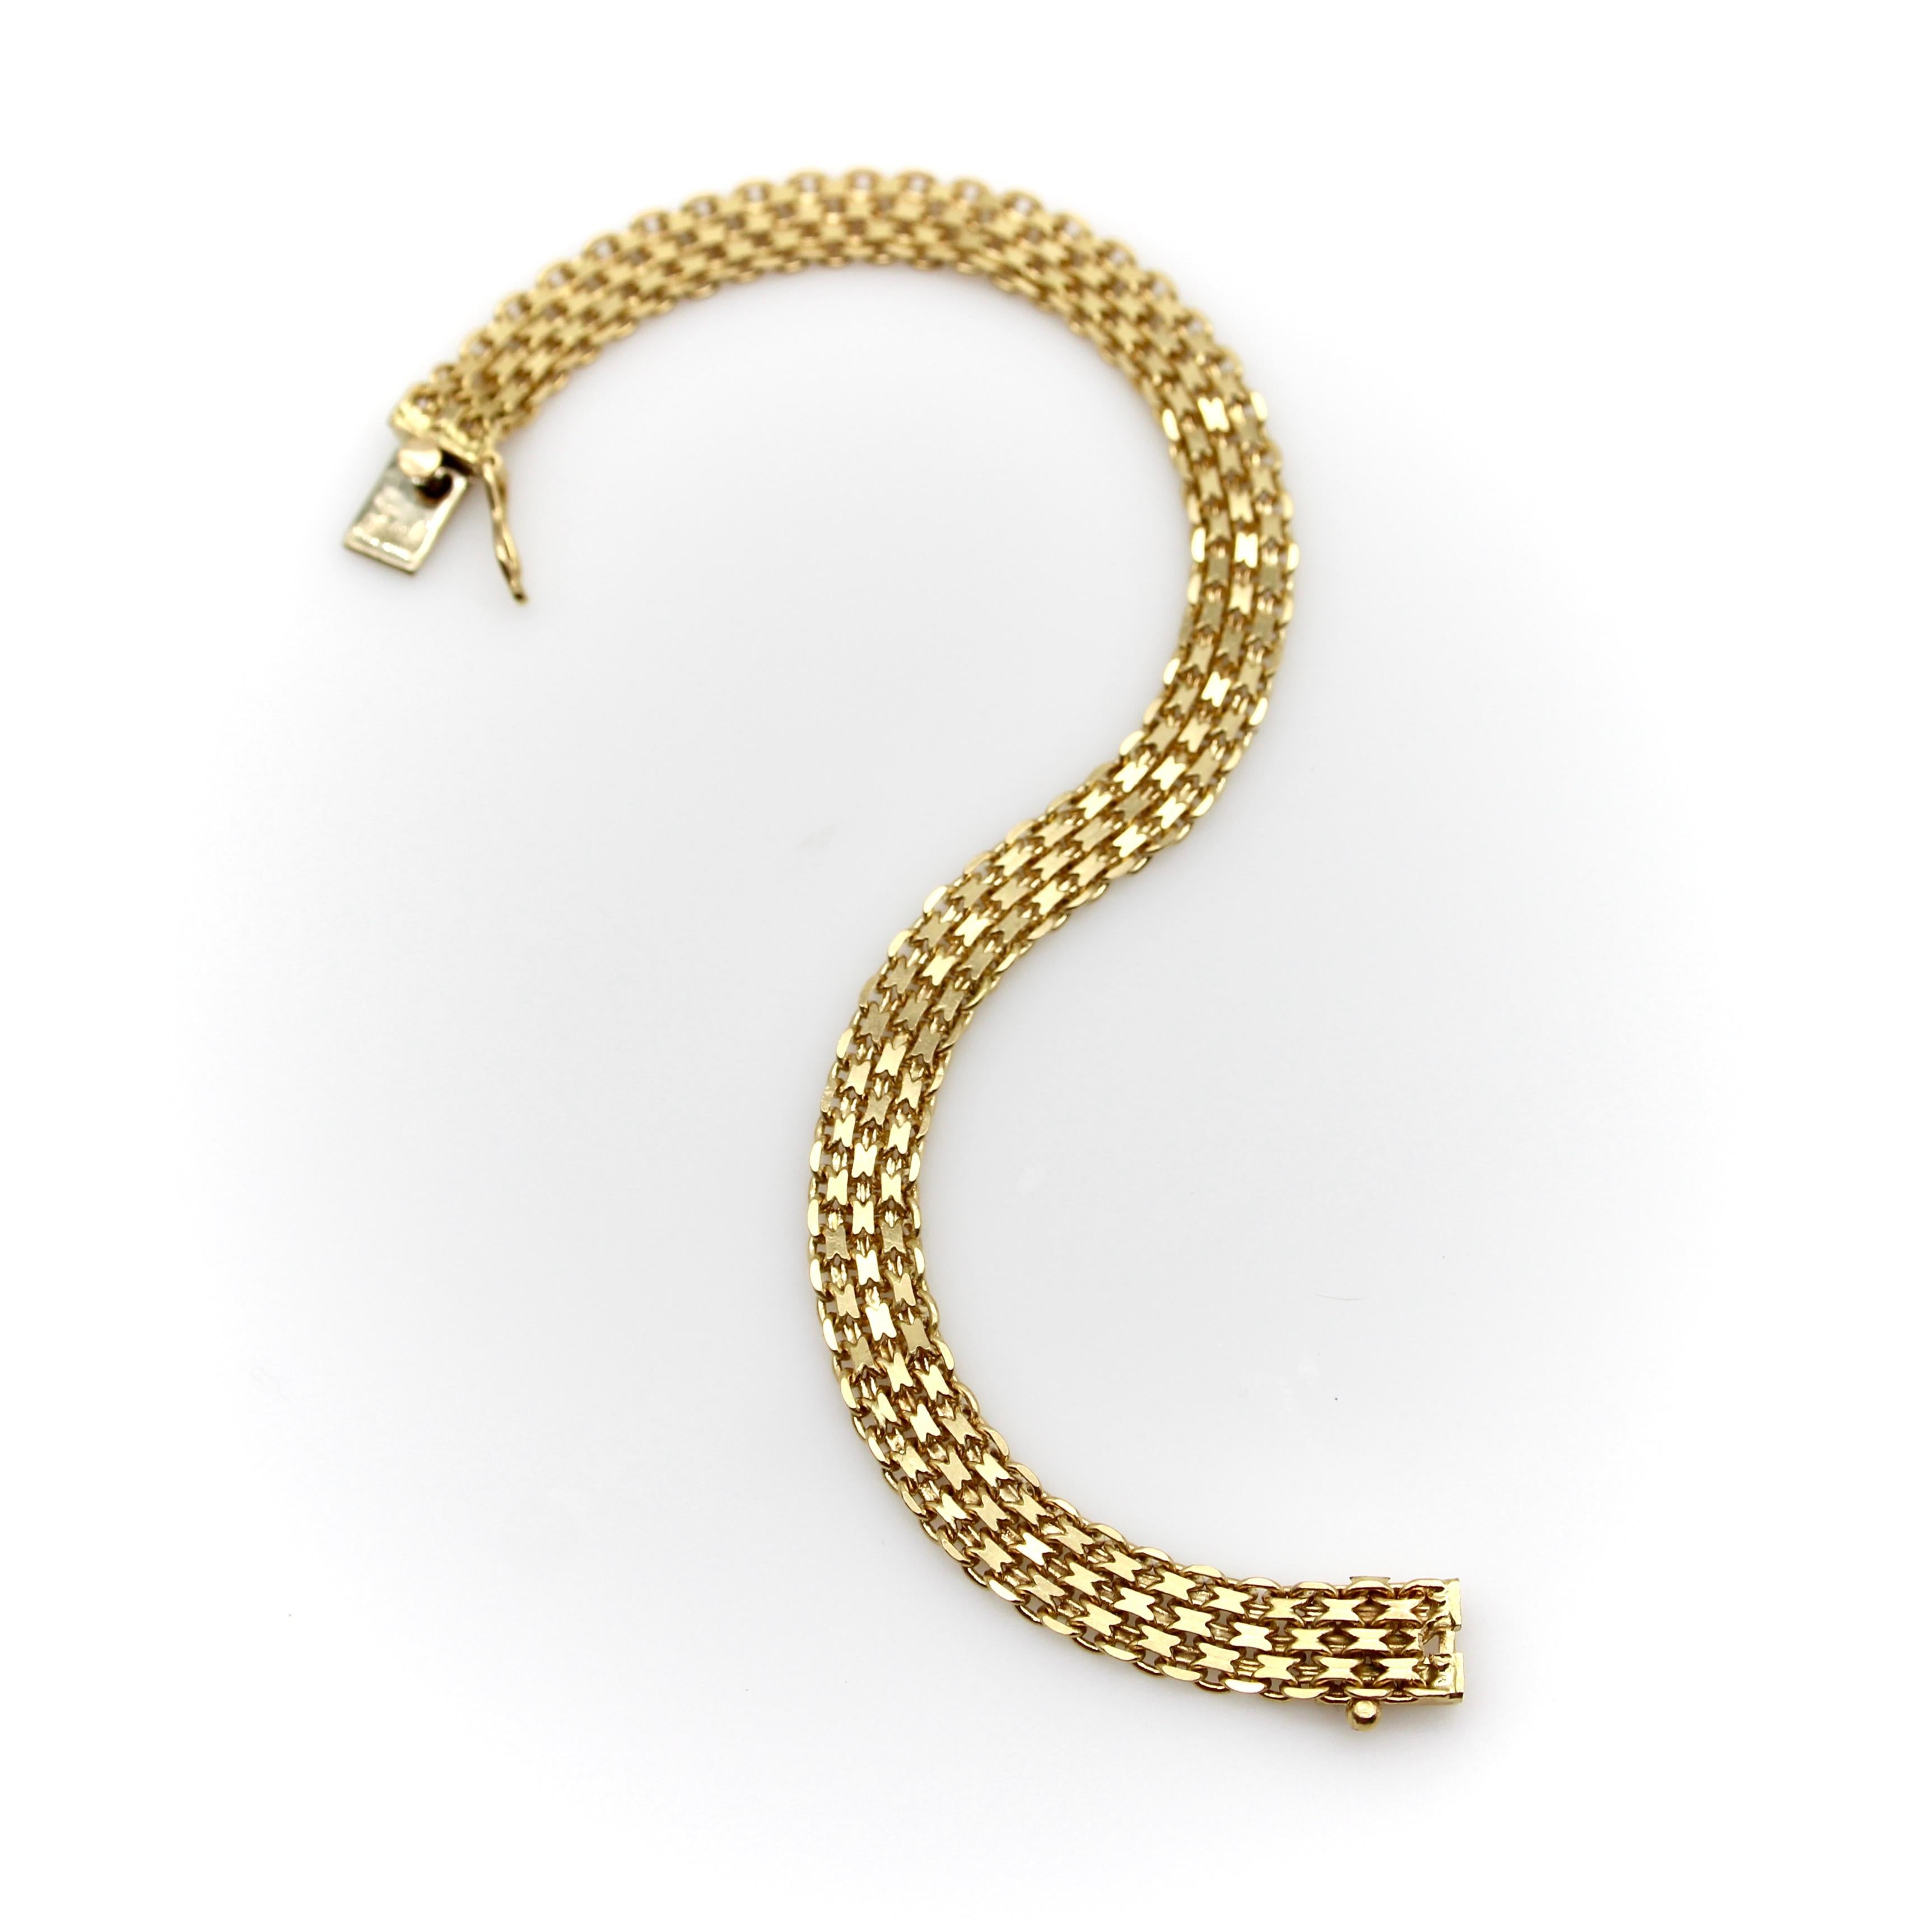 This is a woven 18k gold bracelet with interlocking links. The exterior links consist of flattened chain links that interlock into rows for a fluid mesh-like effect that shimmers in the light. This classic Bismark design flows on the wrist like